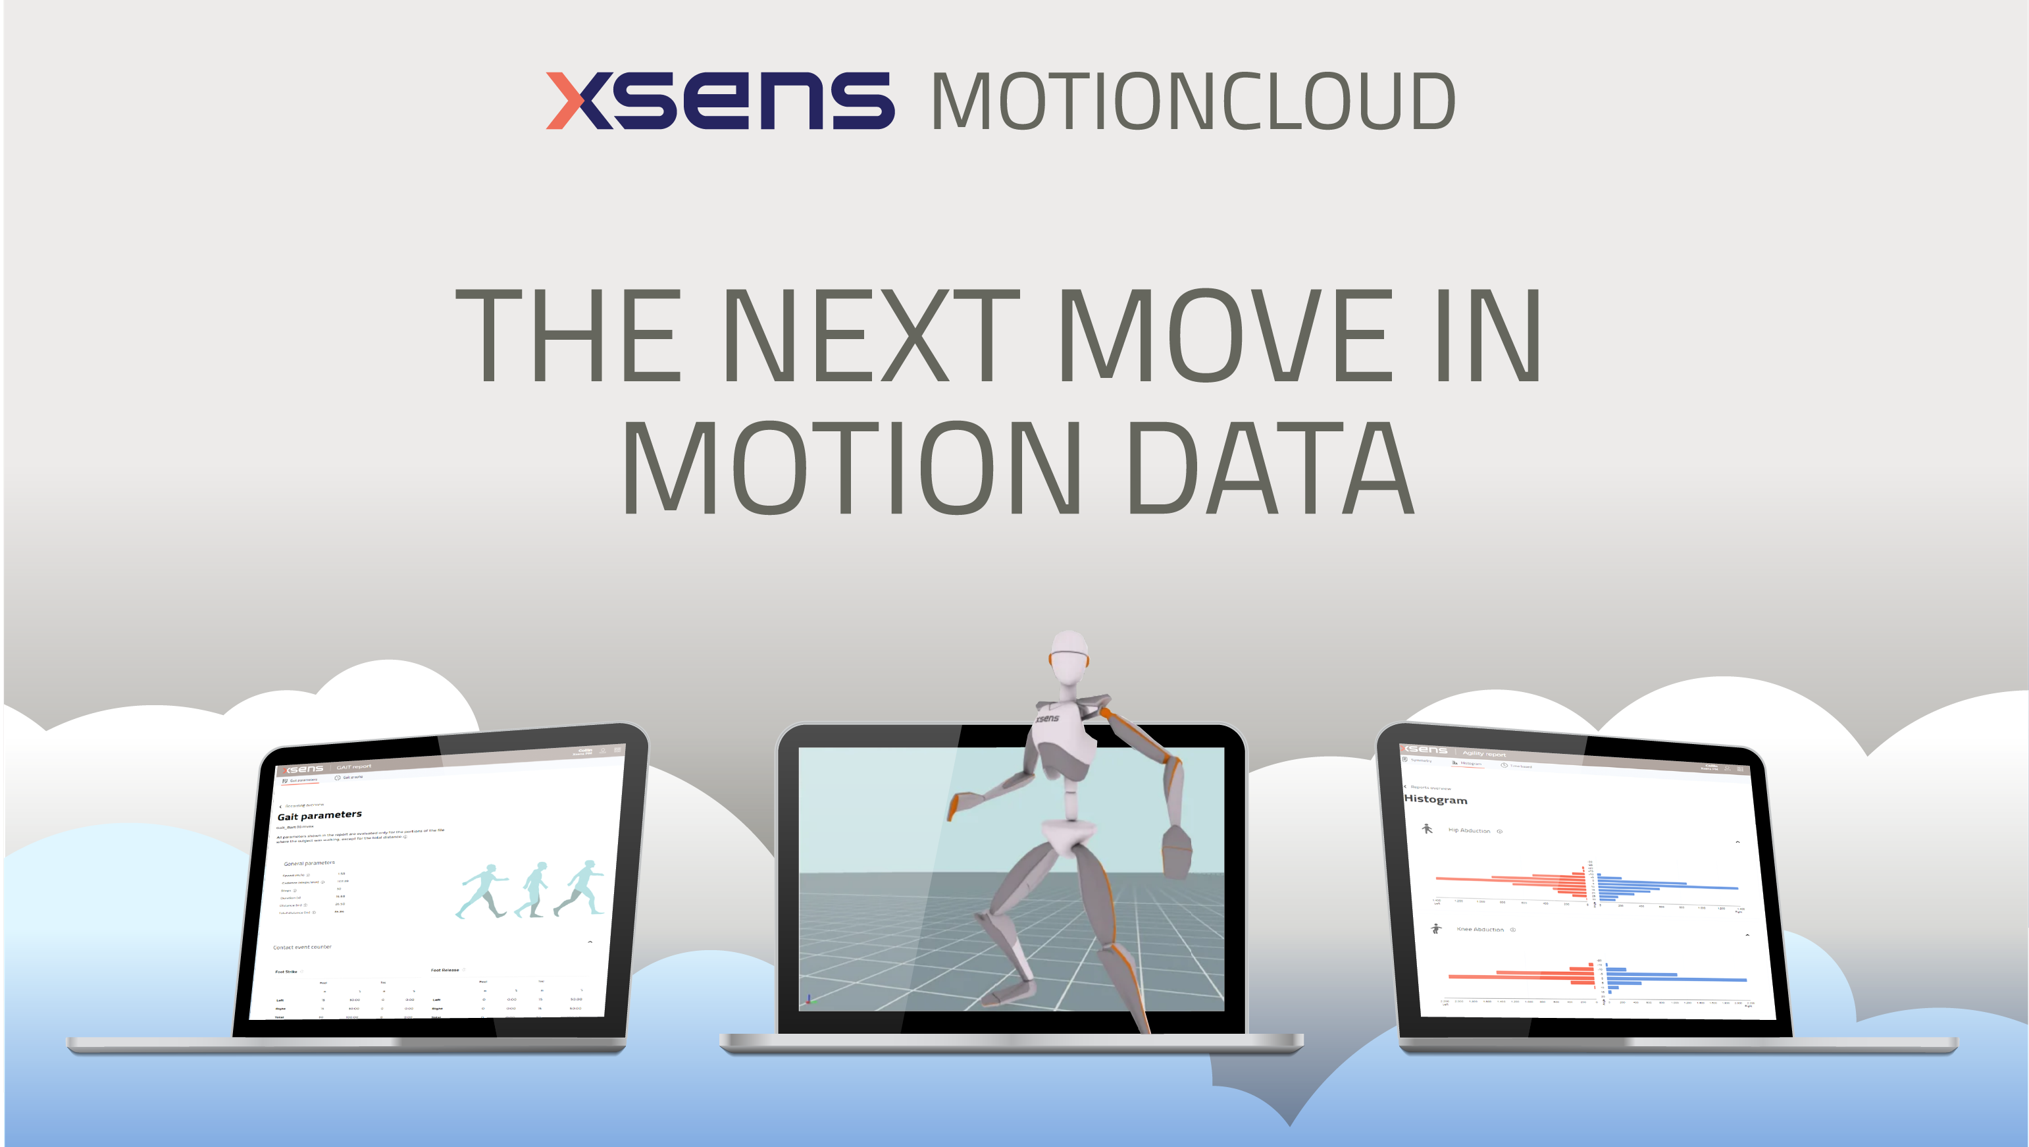 The next move in motion data